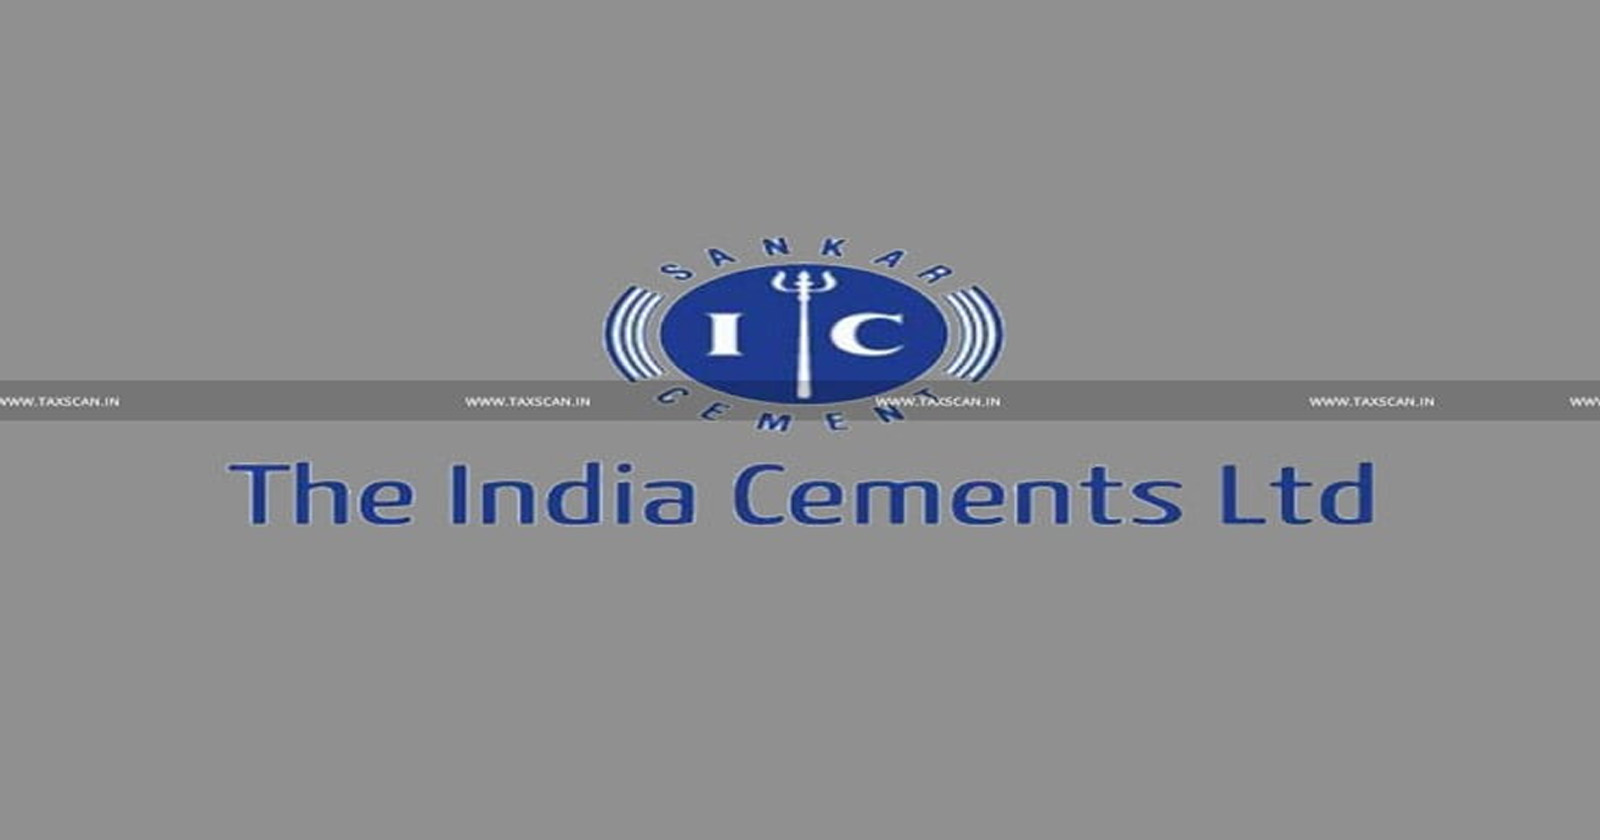 Relief - Relief to India Cements - India Cements - No service Tax - service Tax - taxscan